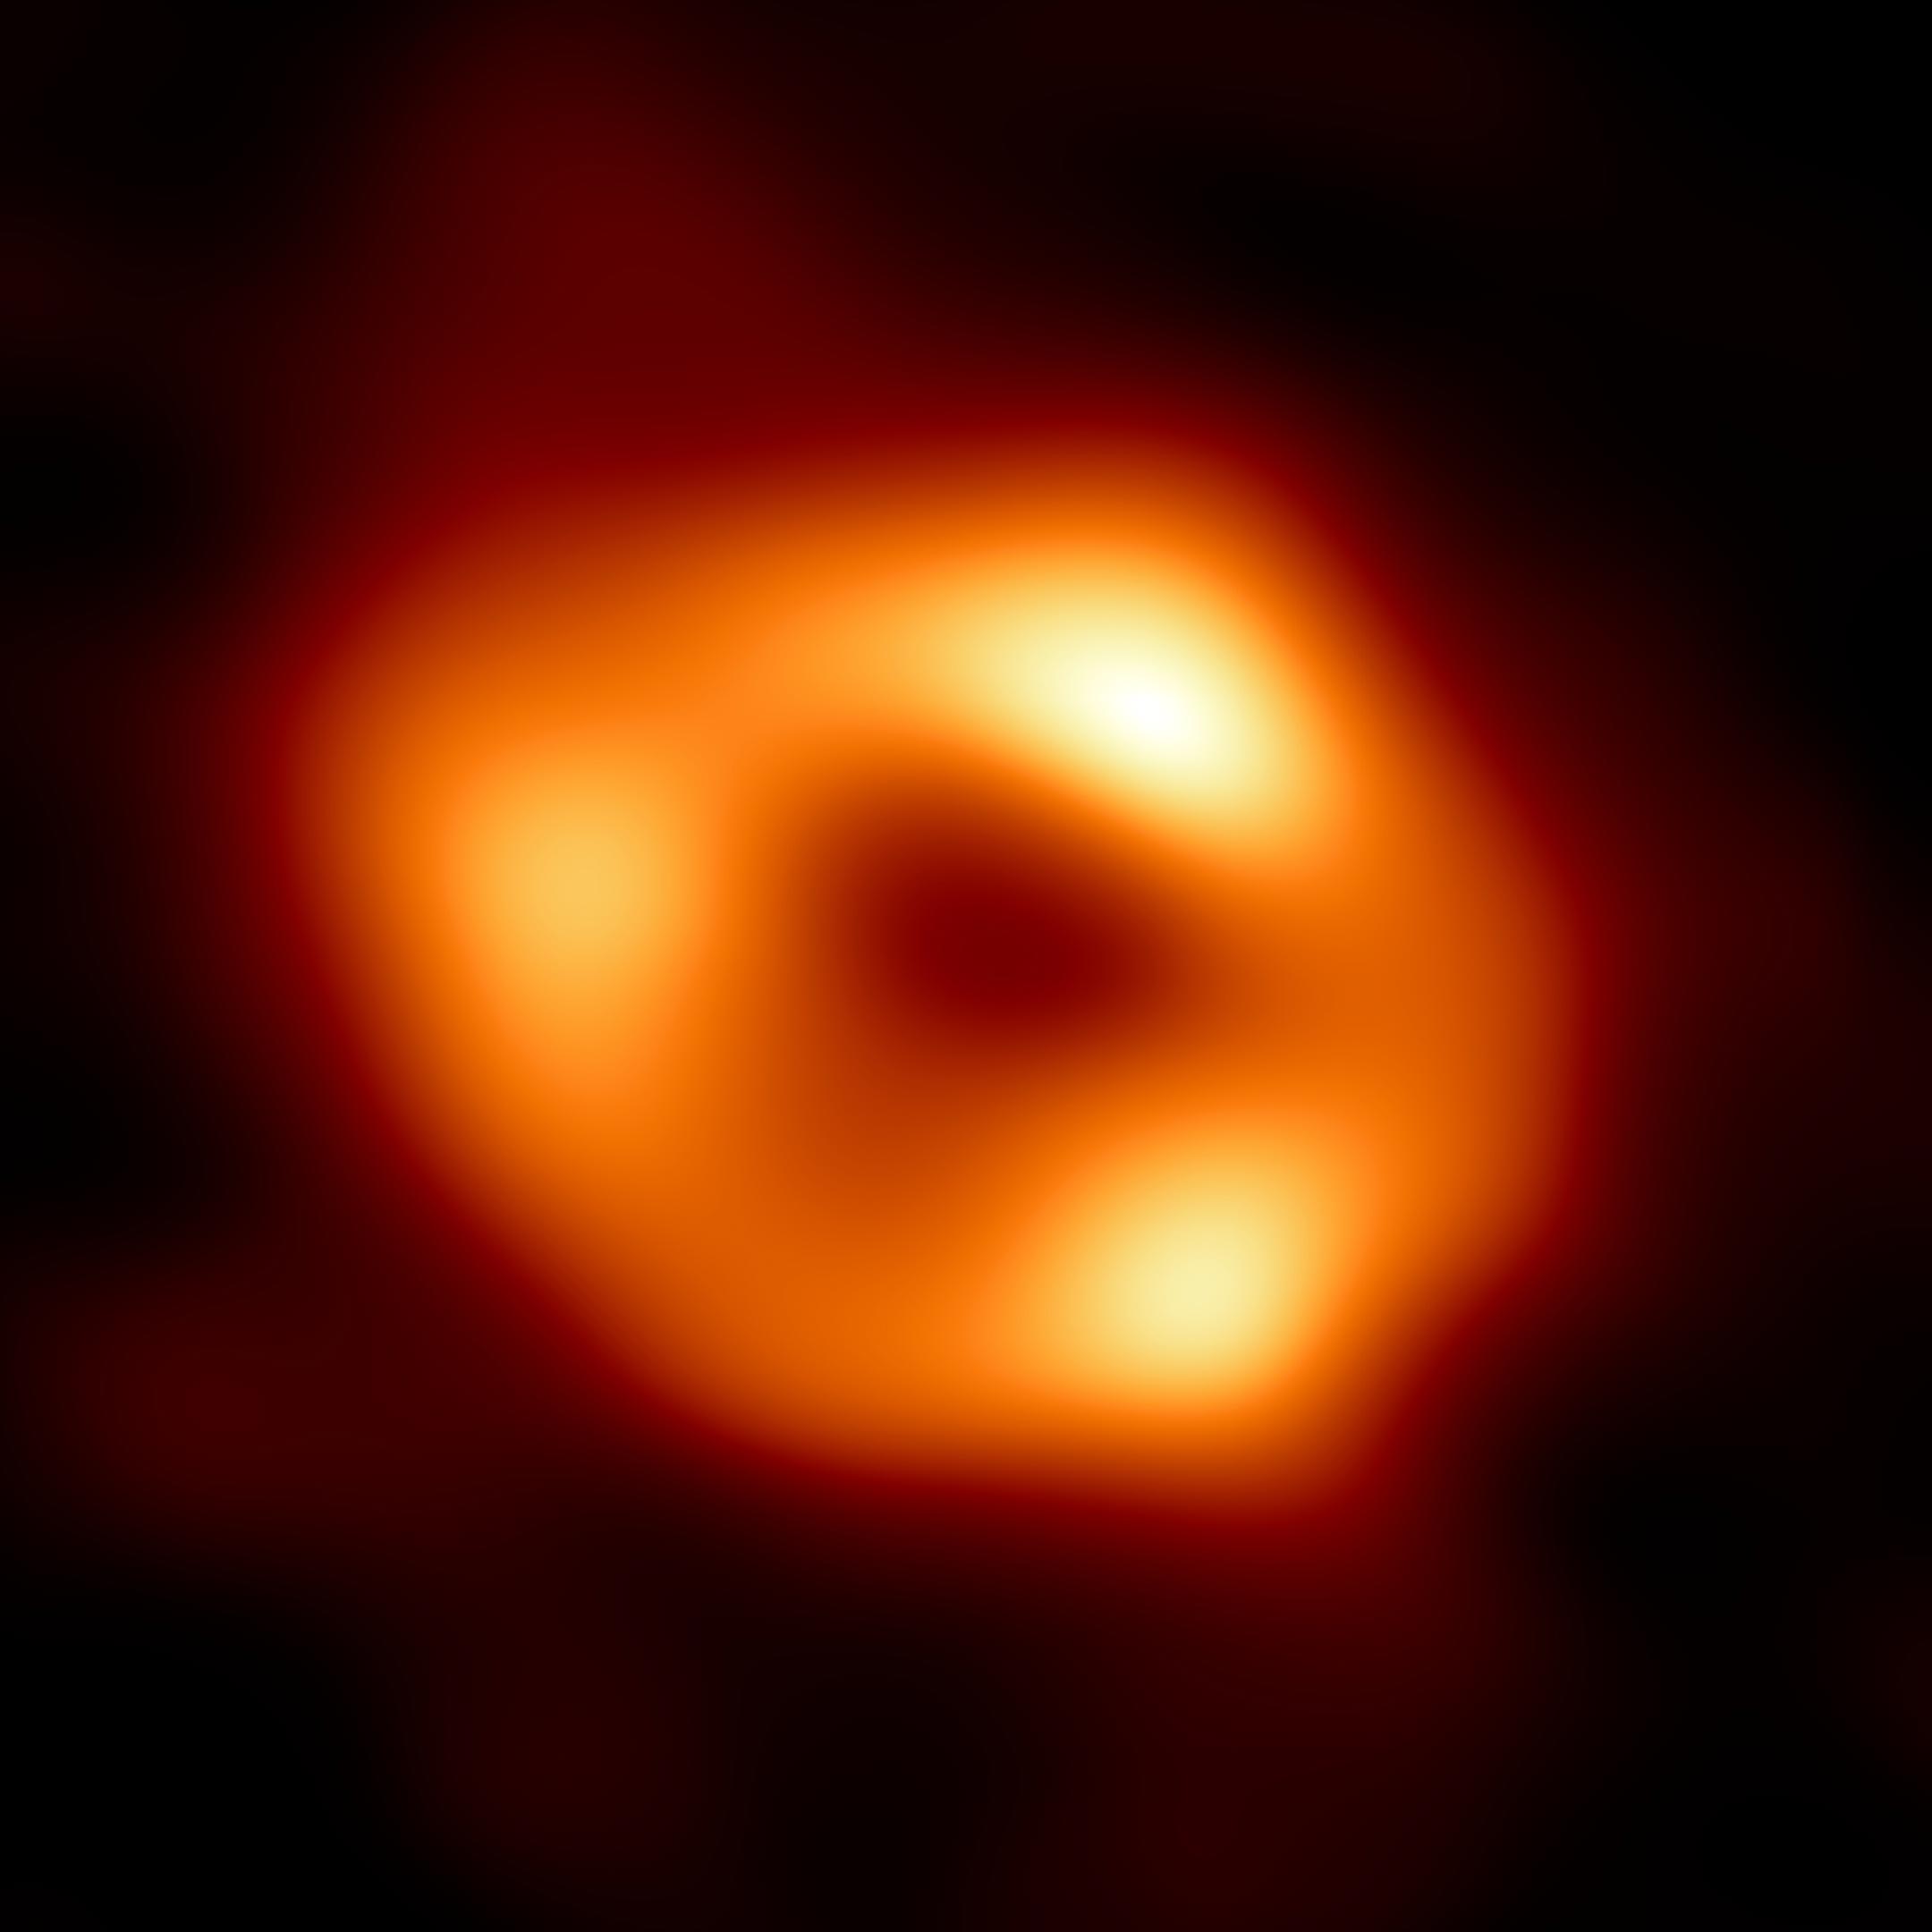 First-Image-of-Our-Black-Hole-Sagittarius-A.jpg